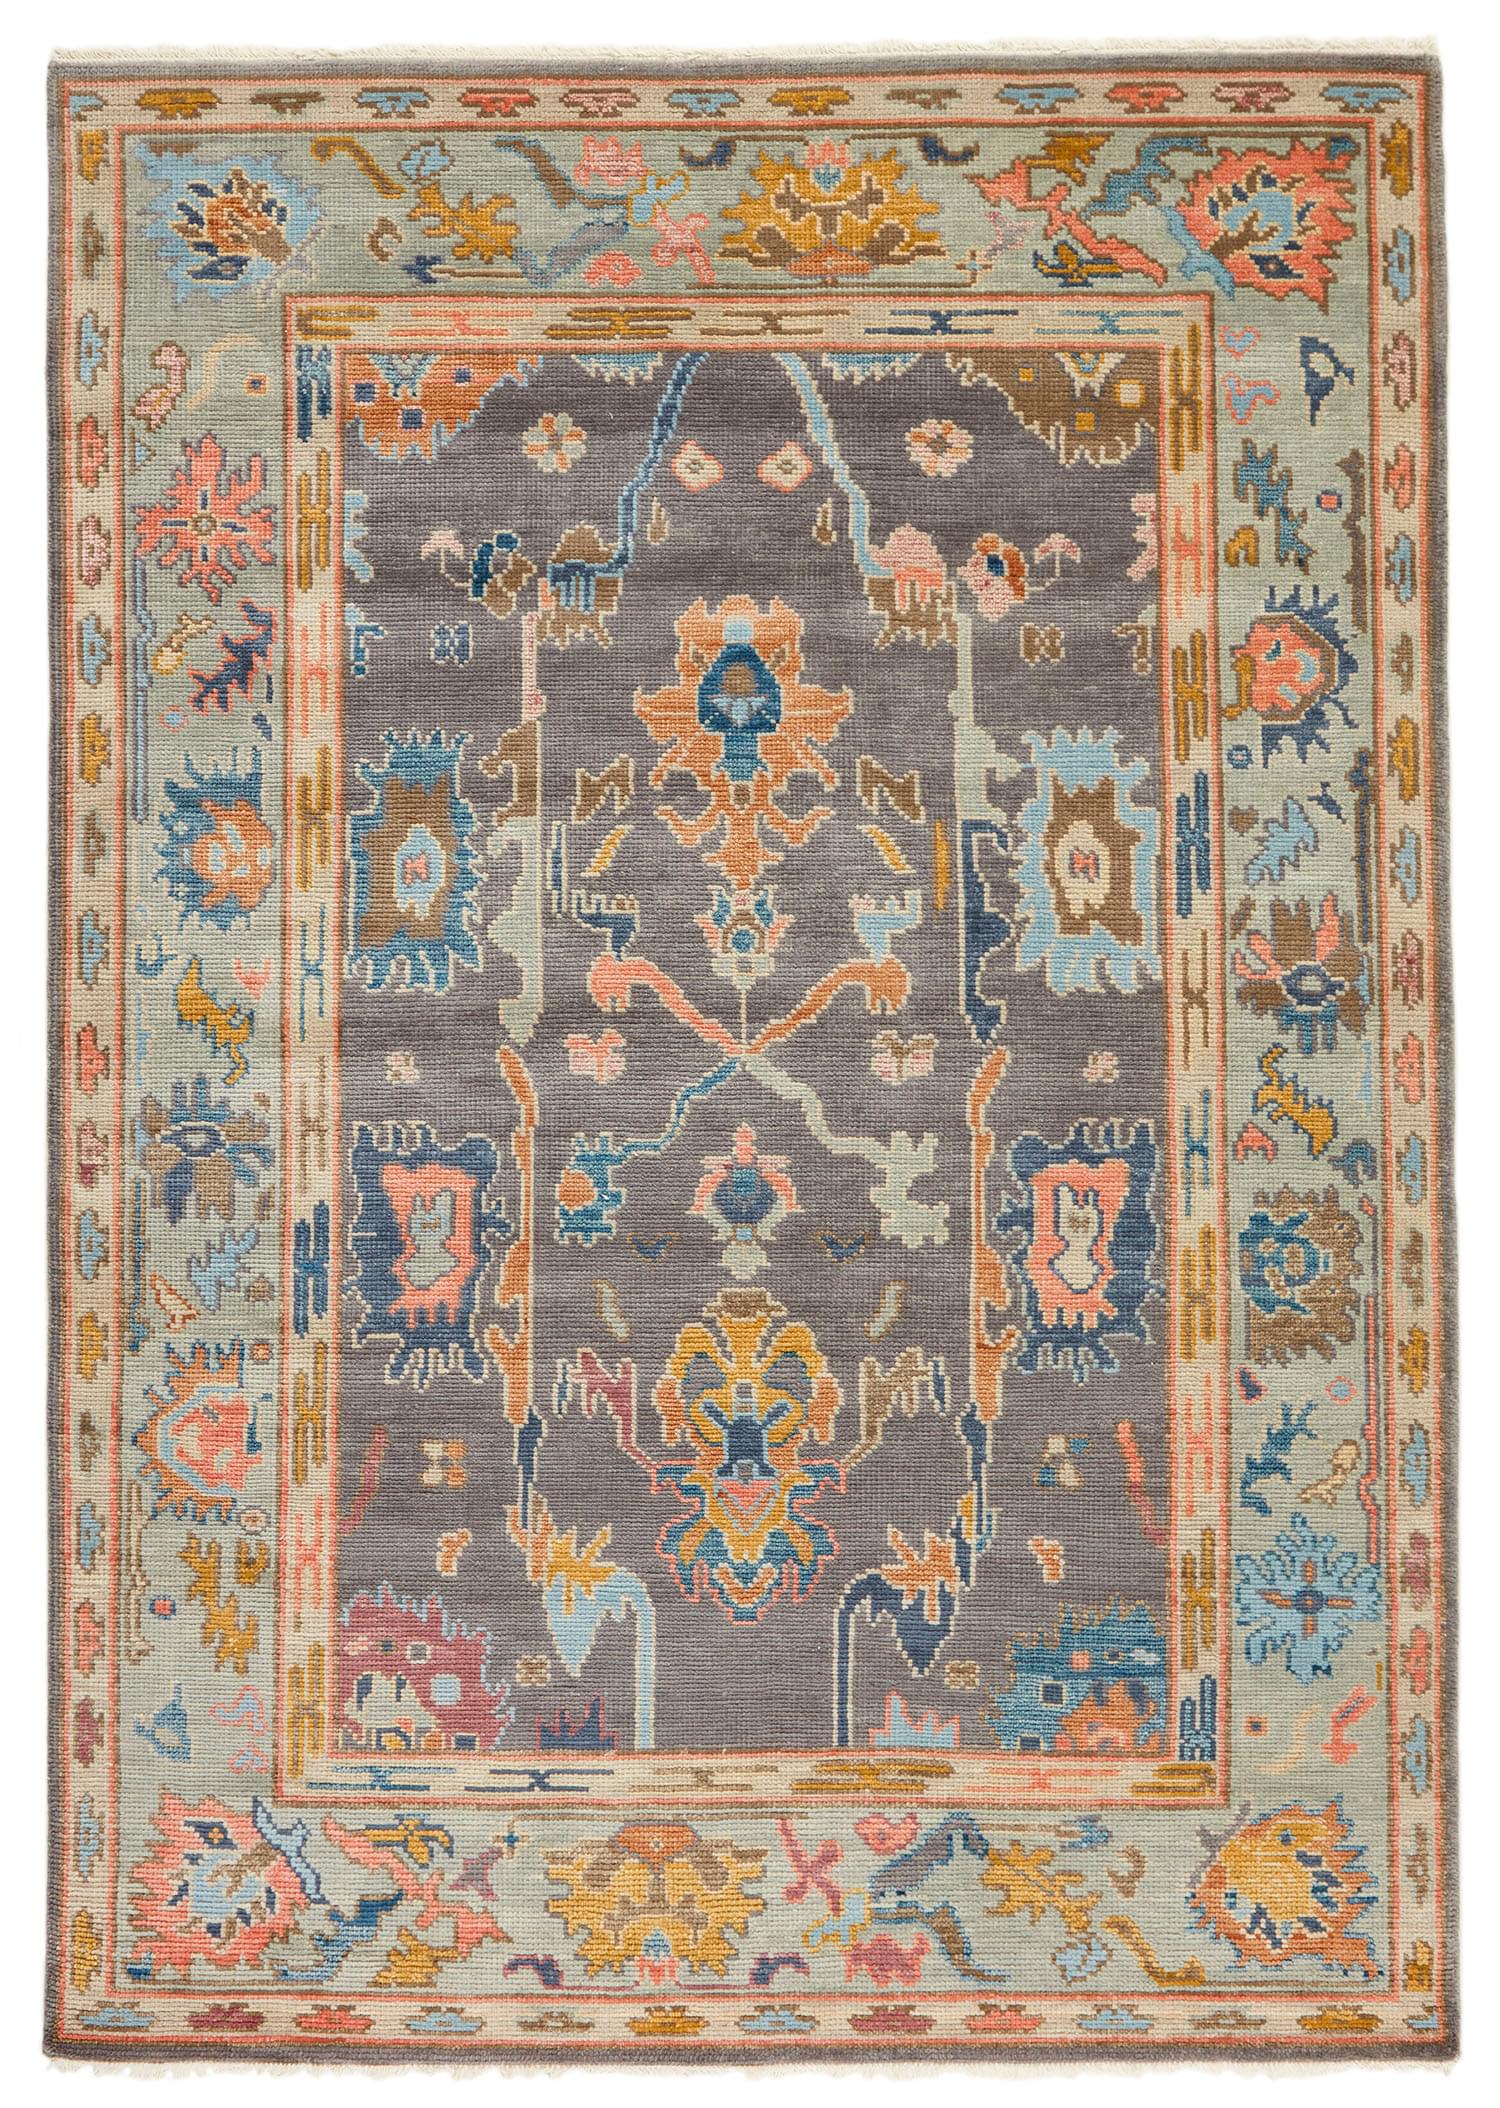 authentic Oriental rug with traditional motifs in red, pink, orange, yellow, blue, sky, green, beige, brown and grey